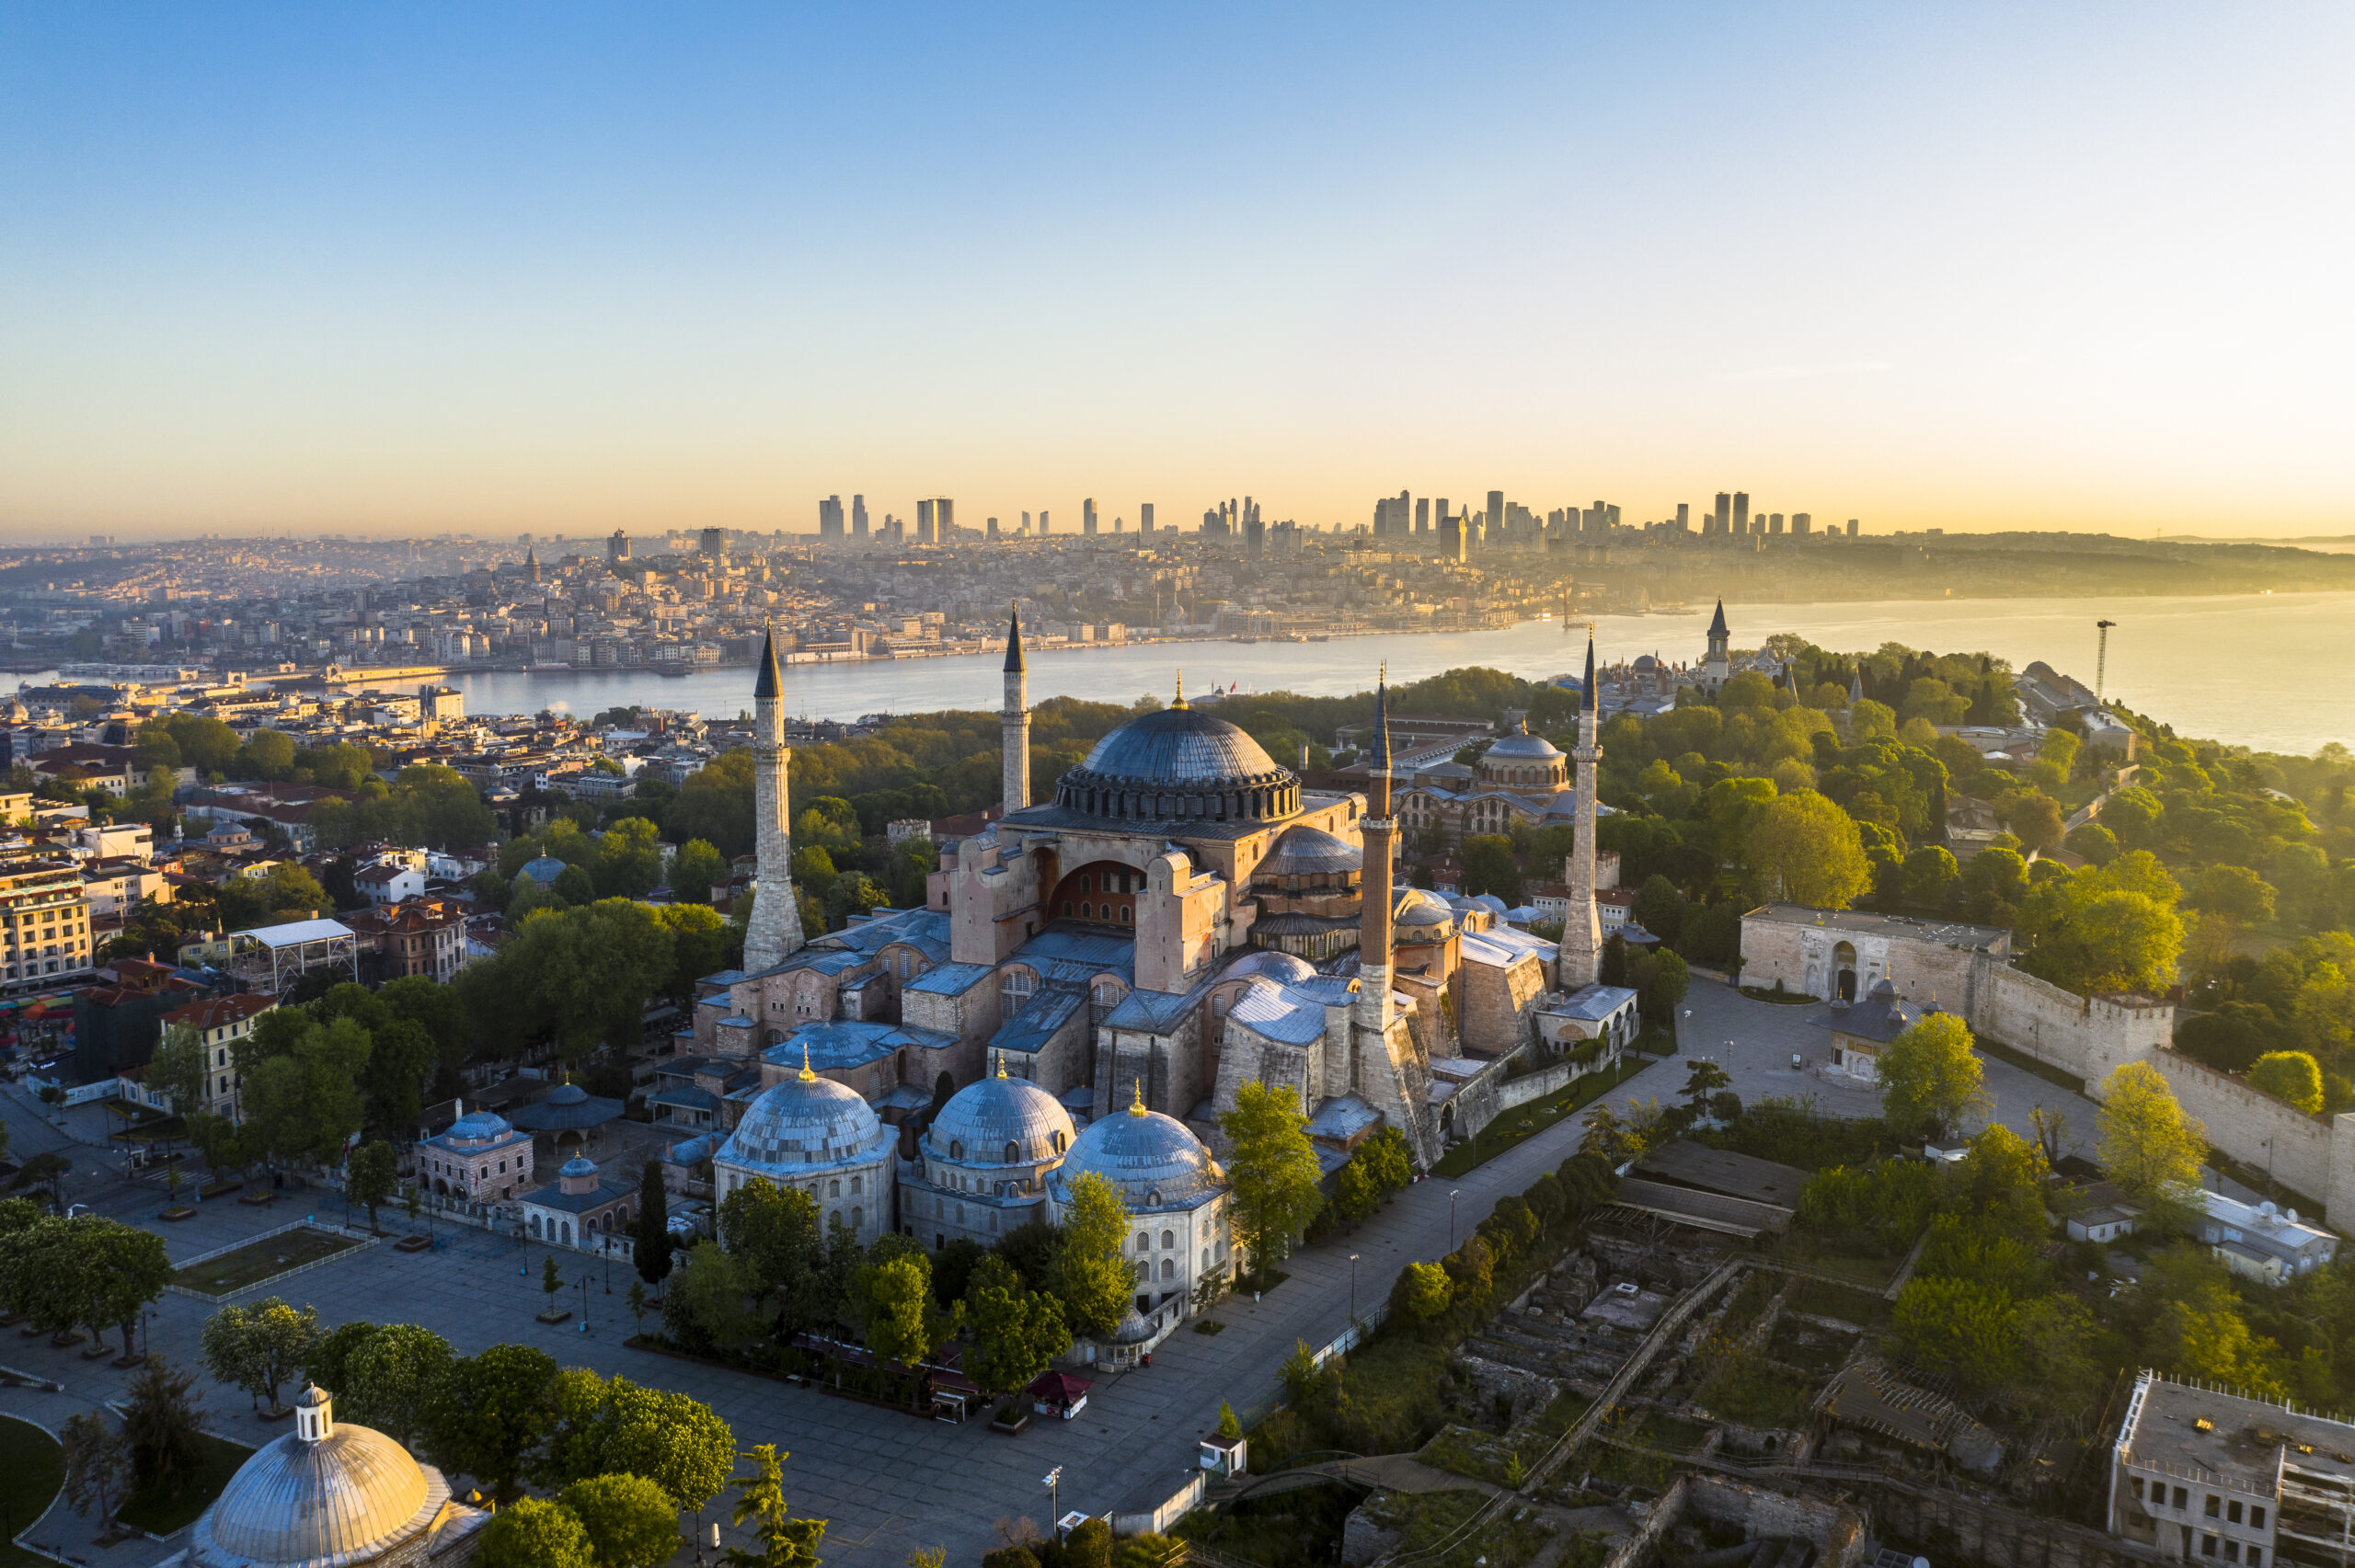 Istanbul Wins "Best City in Europe" in Travel+Leisure's World's Best Awards 2023